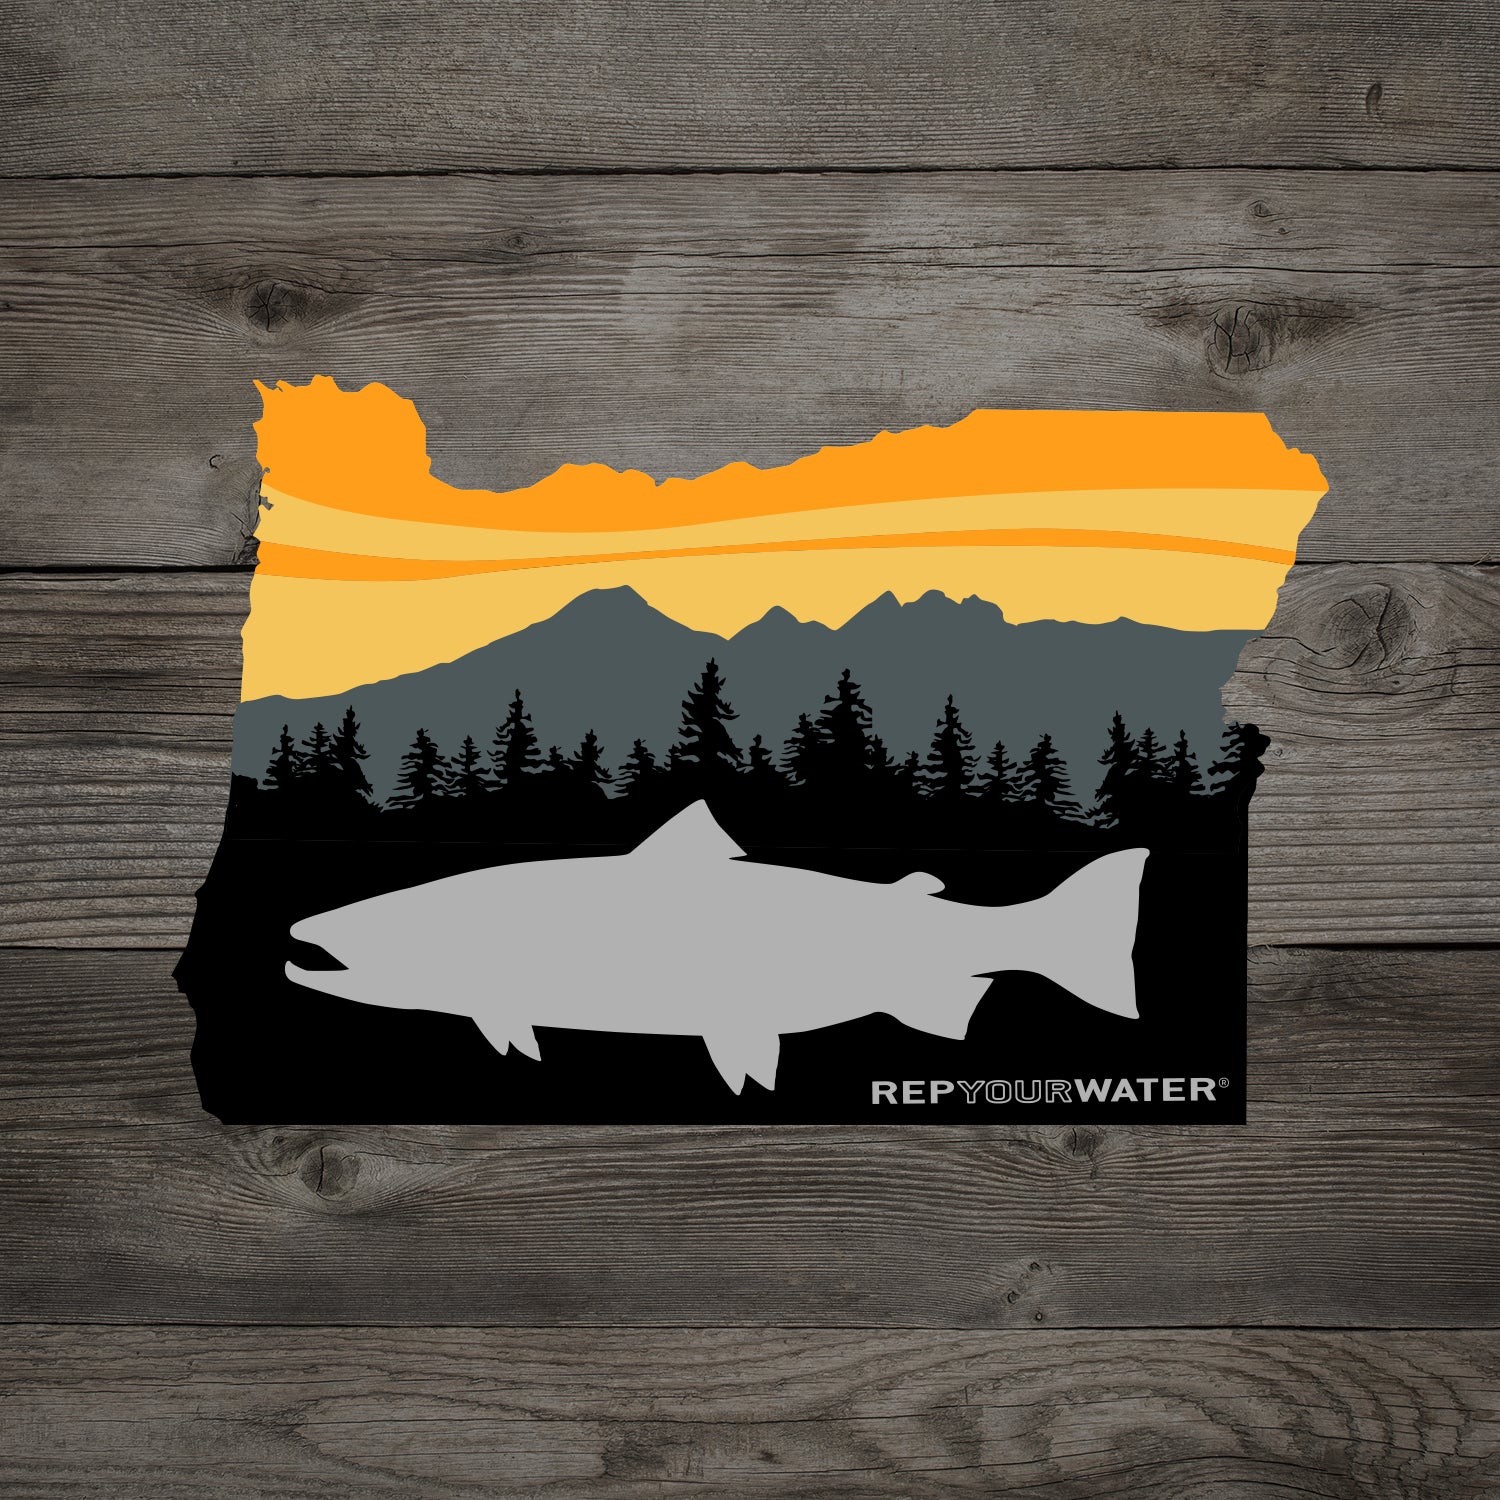 A wood background has a sticker in the shape of oregon stsate with a trout in front of trees mountains and a sunset